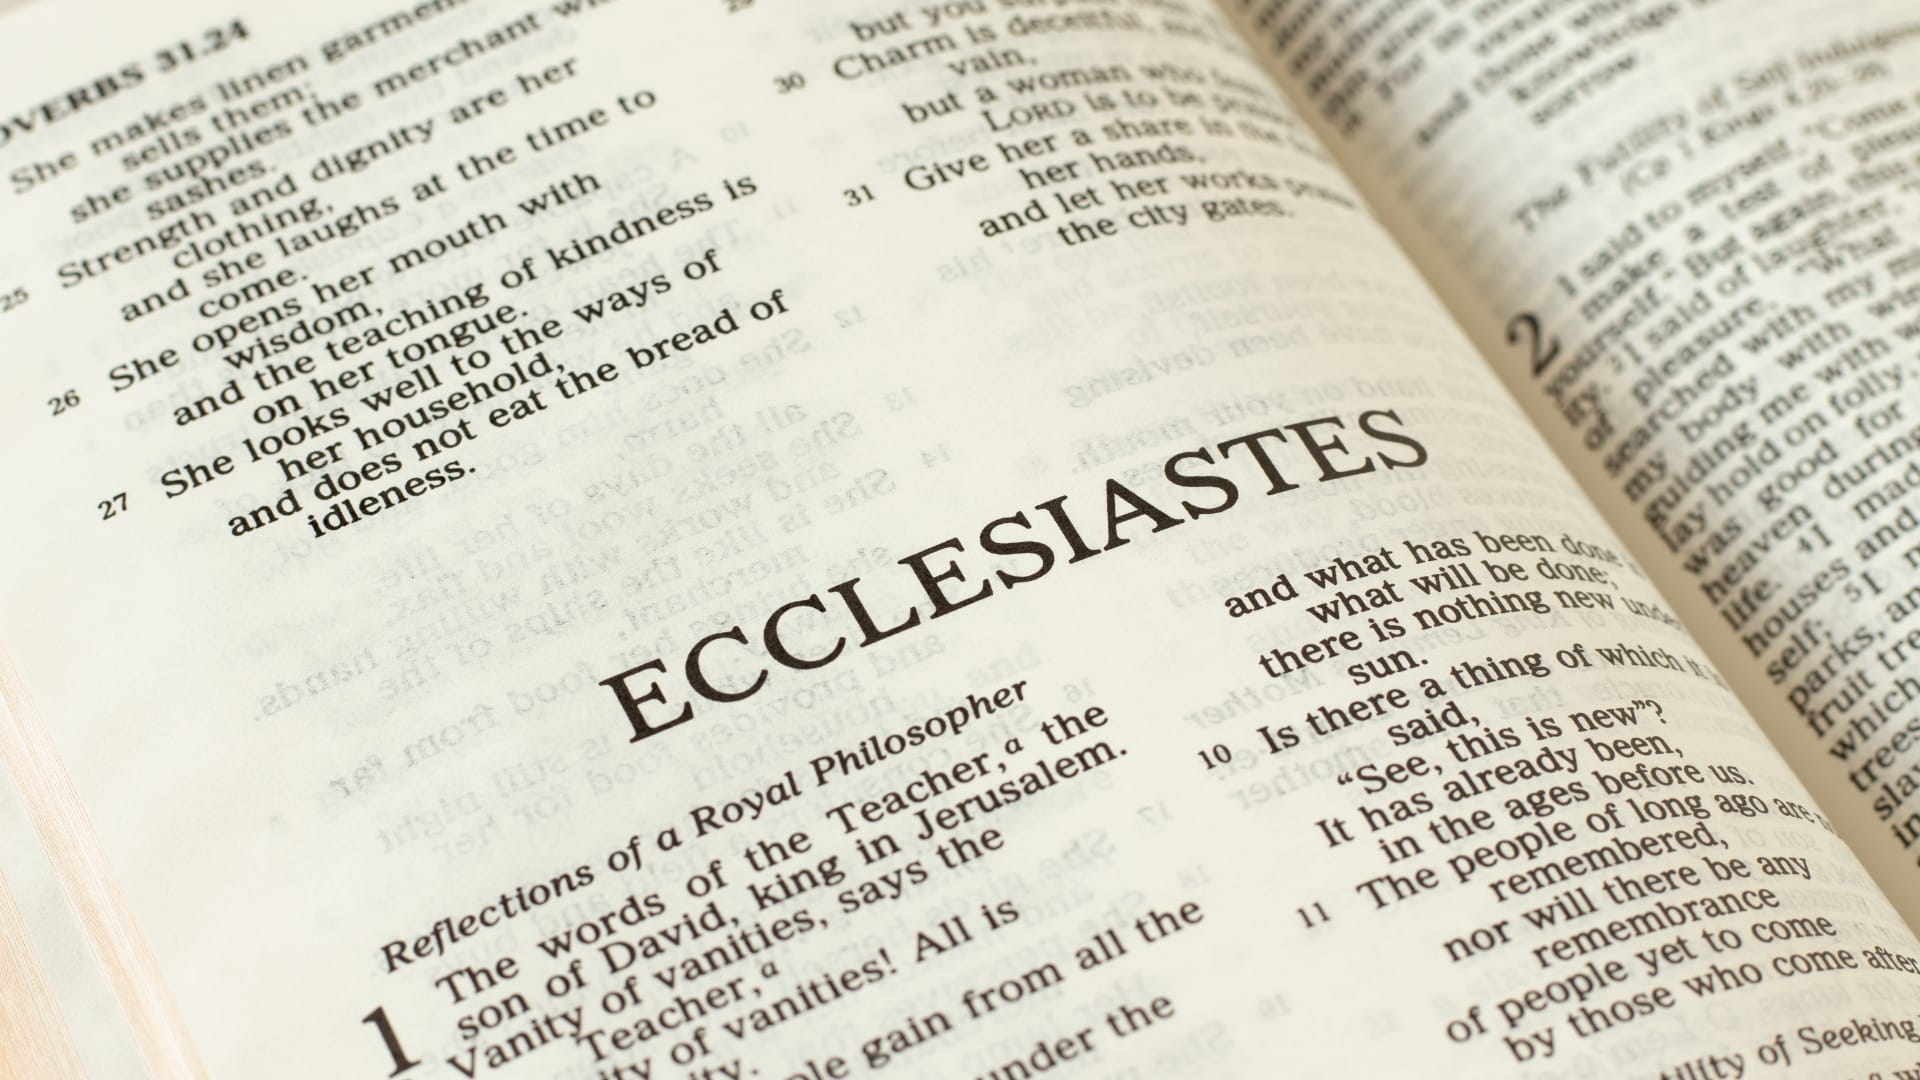 The End of the Matter (Ecclesiastes 12:9-14)